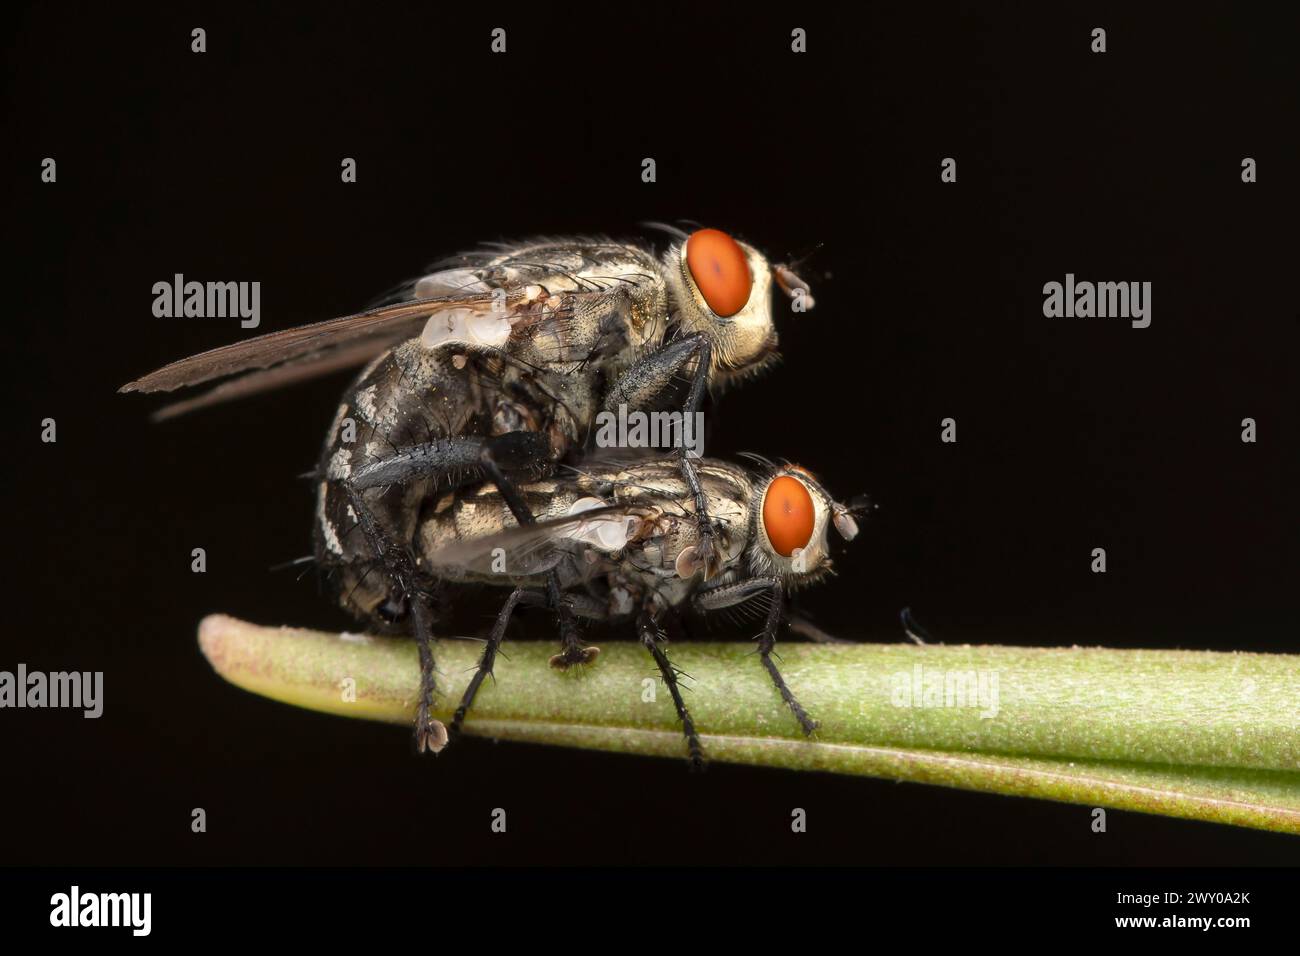 A pair of Sarcophaga bercaea flesh flies engaged in mating on a plant stem. Stock Photo